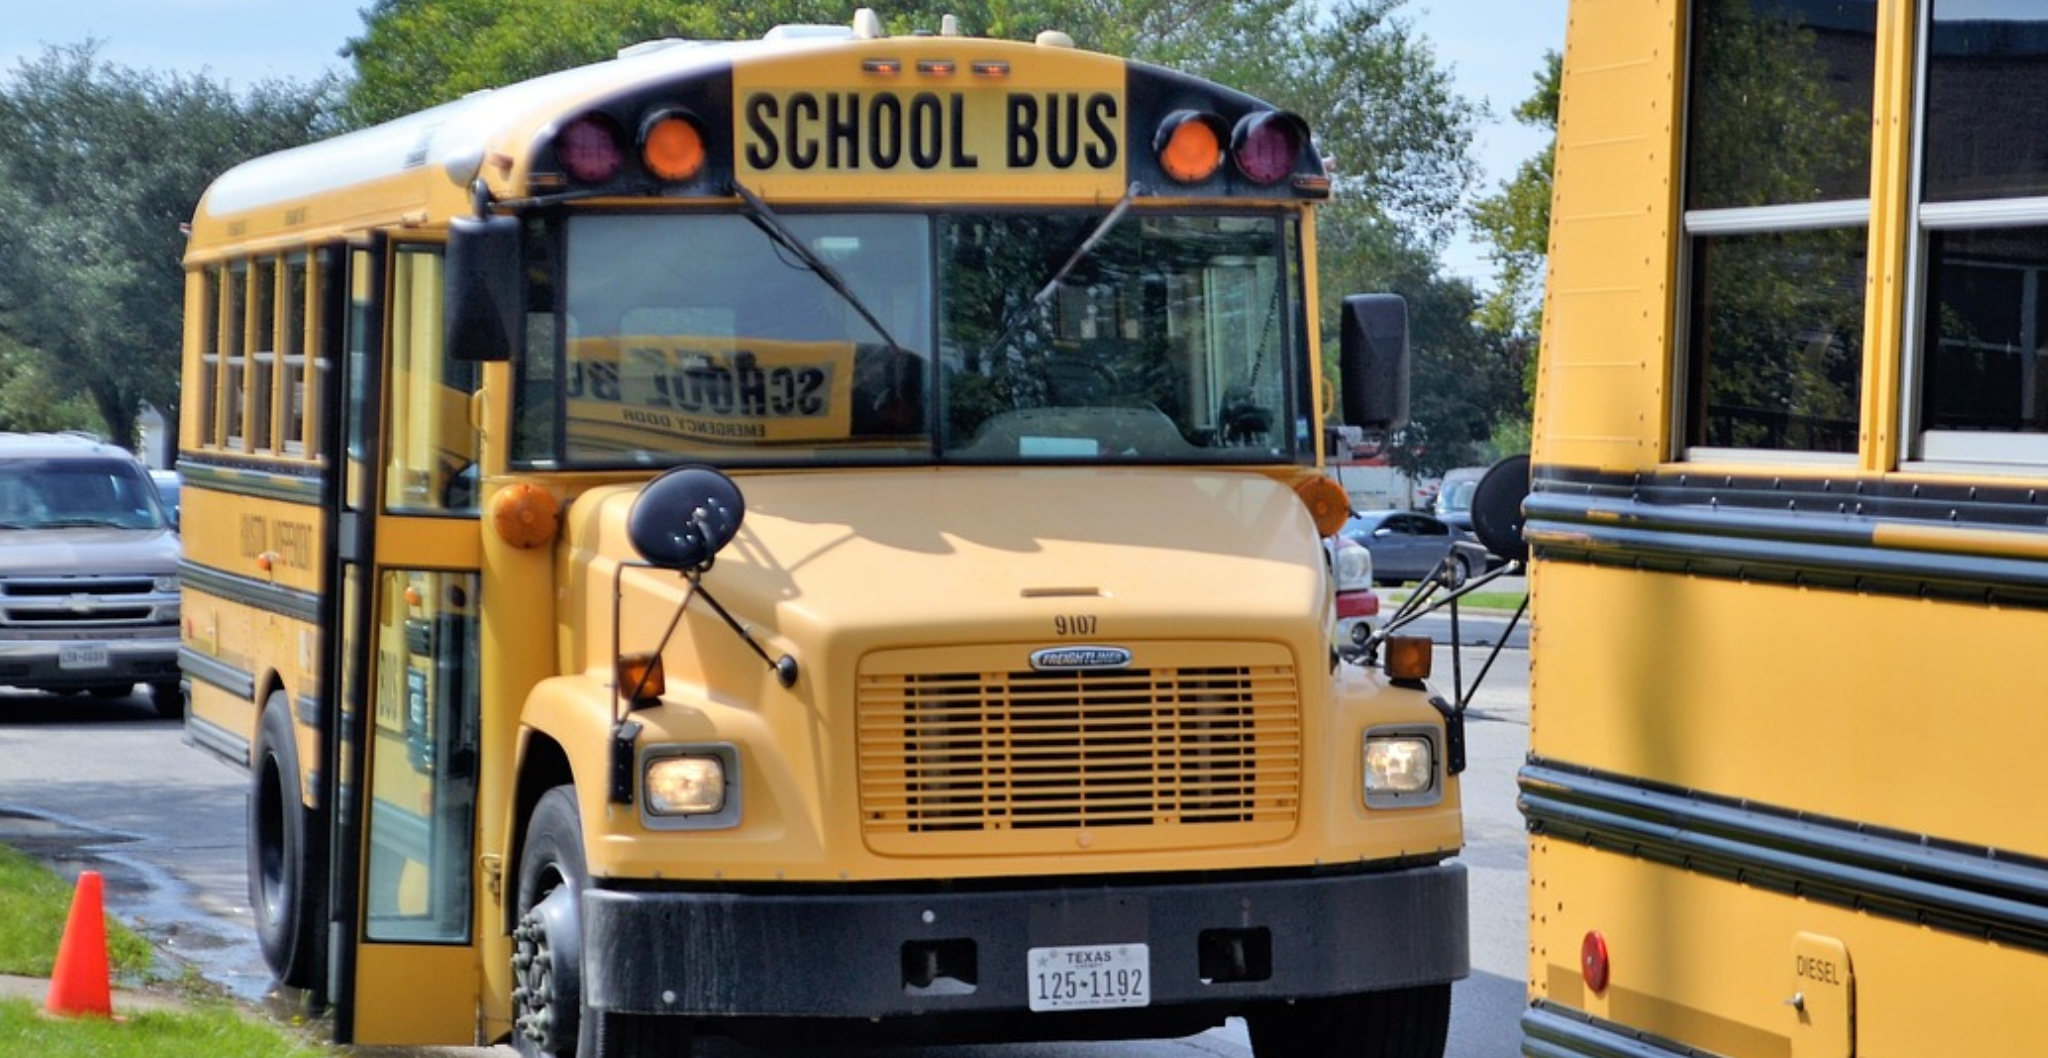 Deodorize, And Sanitize School Buses